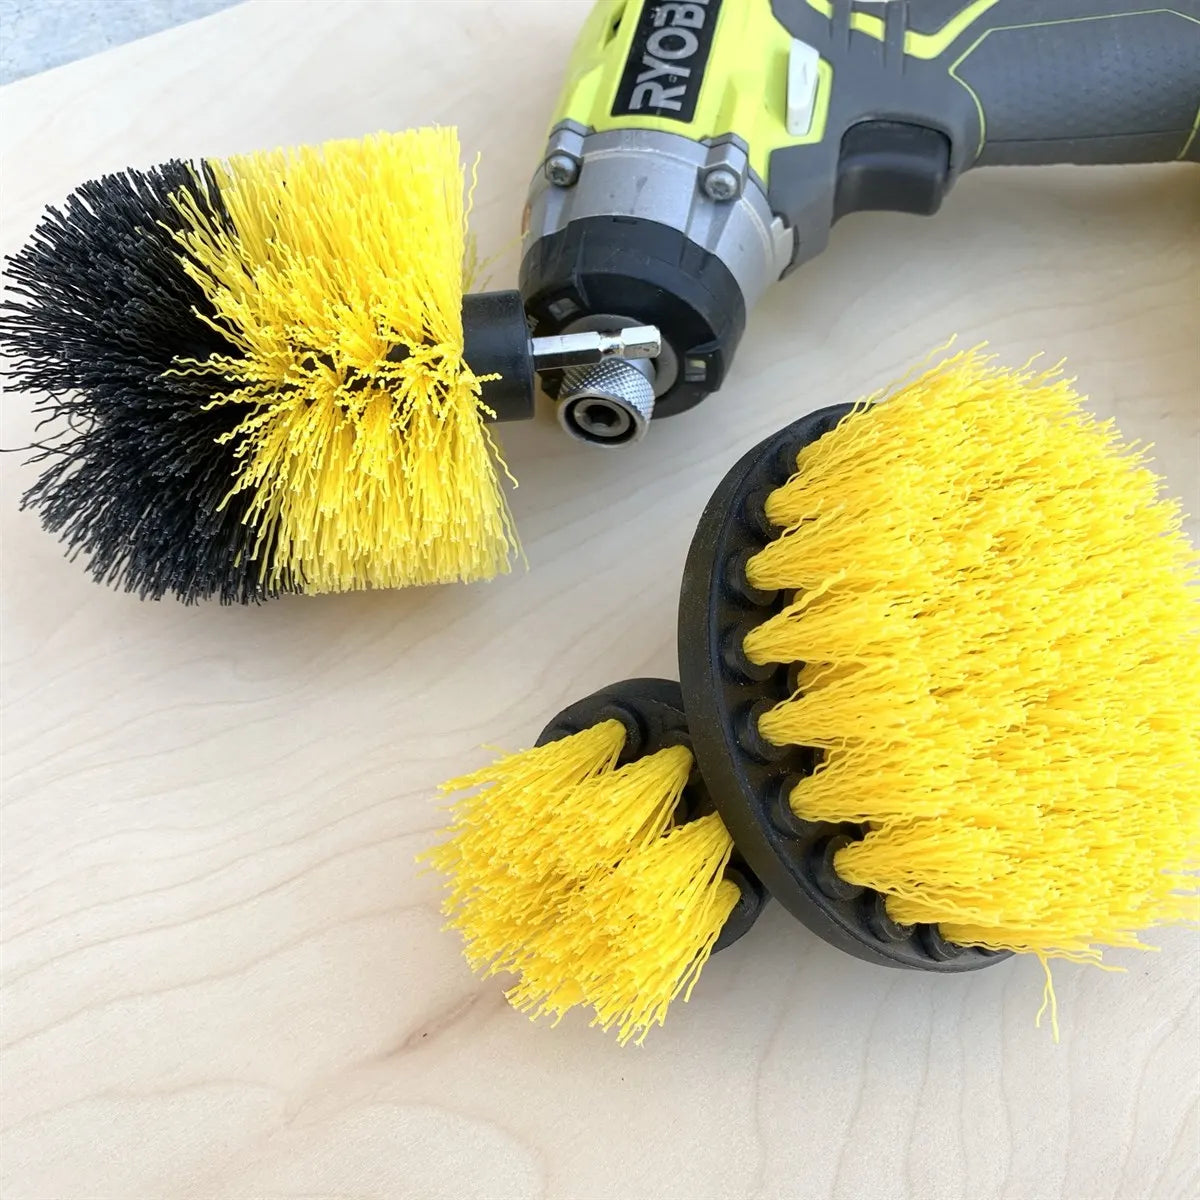 Power Drill Cleaning Brush Set | 3-Piece Set